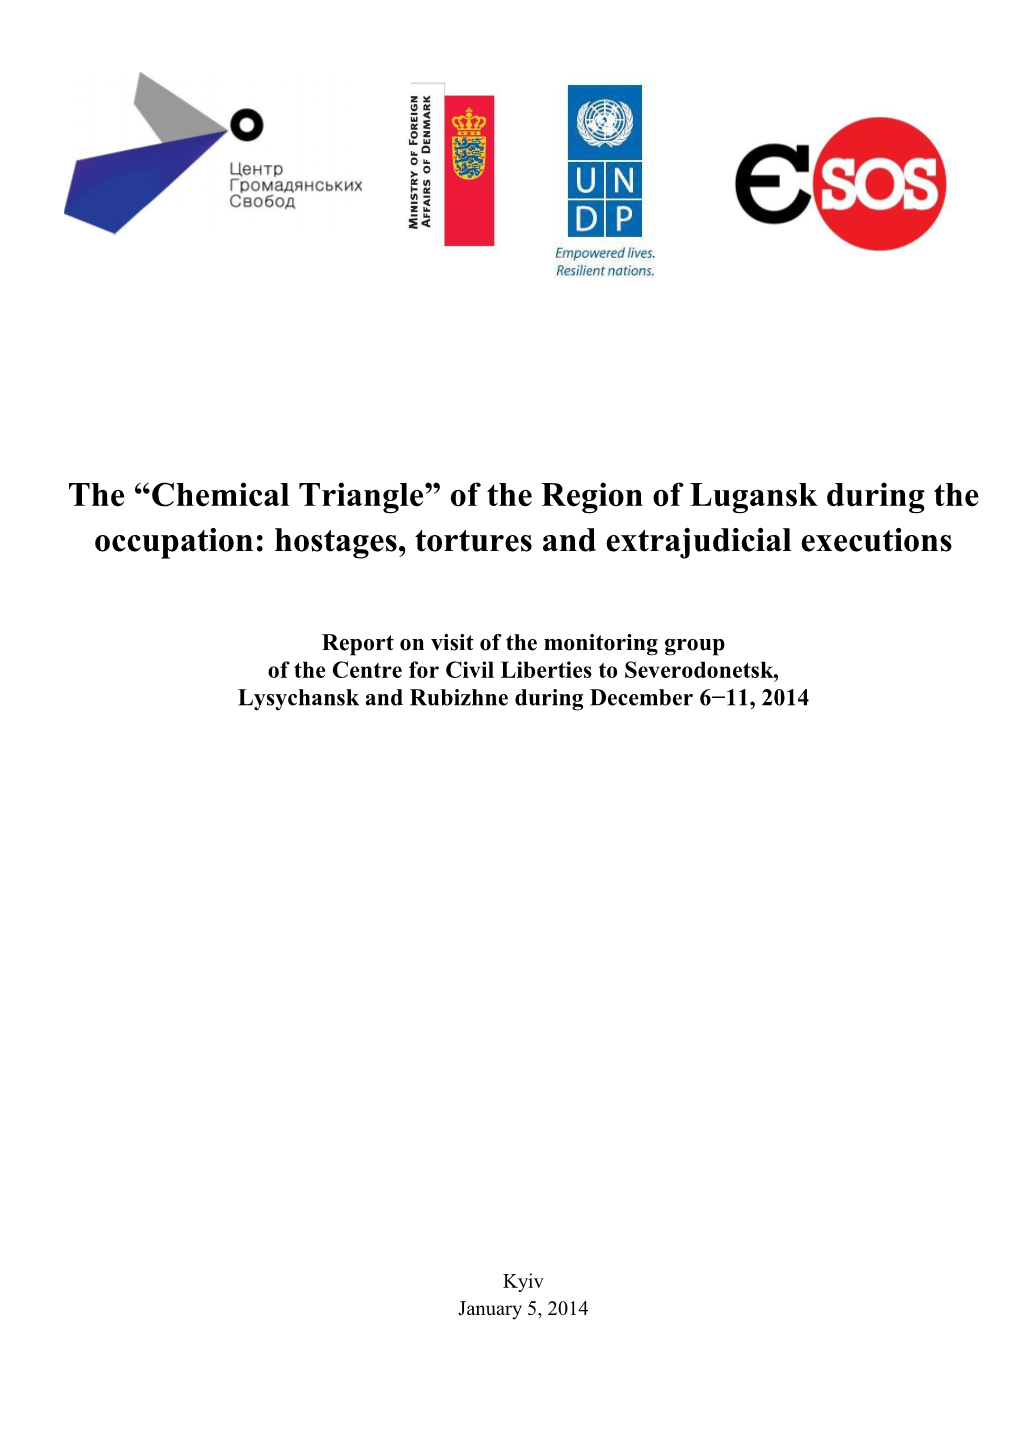 The “Chemical Triangle” of the Region of Lugansk During the Occupation: Hostages, Tortures and Extrajudicial Executions